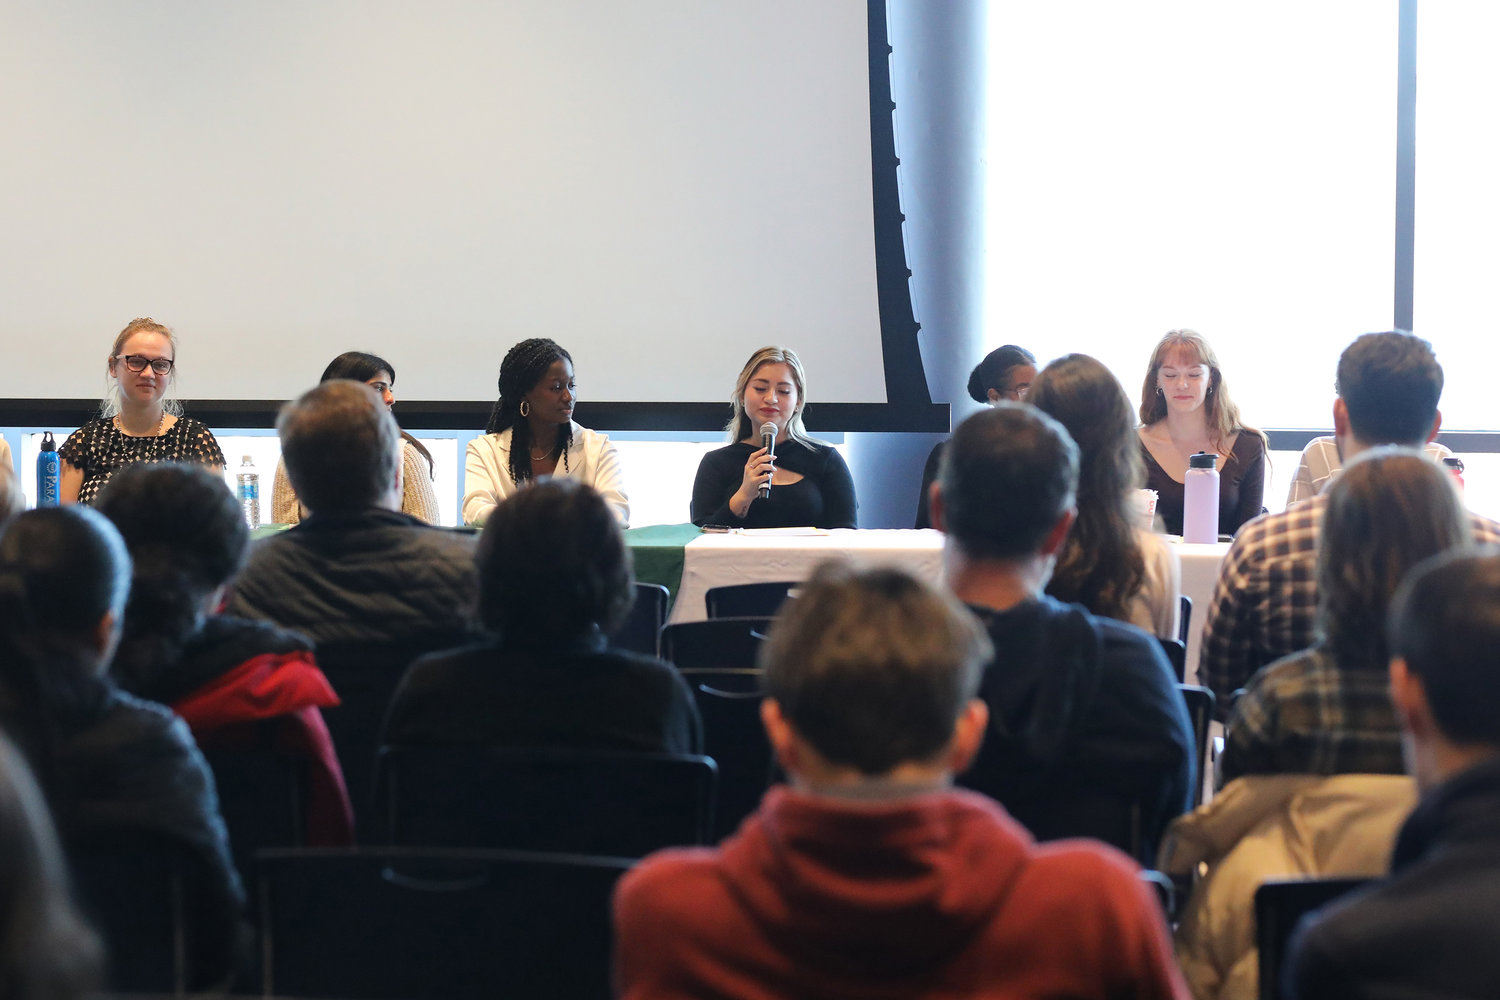 With 20 panelists, around 100 people attended the women in a STEM event on Jan. 28 welcomed alumni, teachers and current students on campus to share their experience, advice and accomplishments.